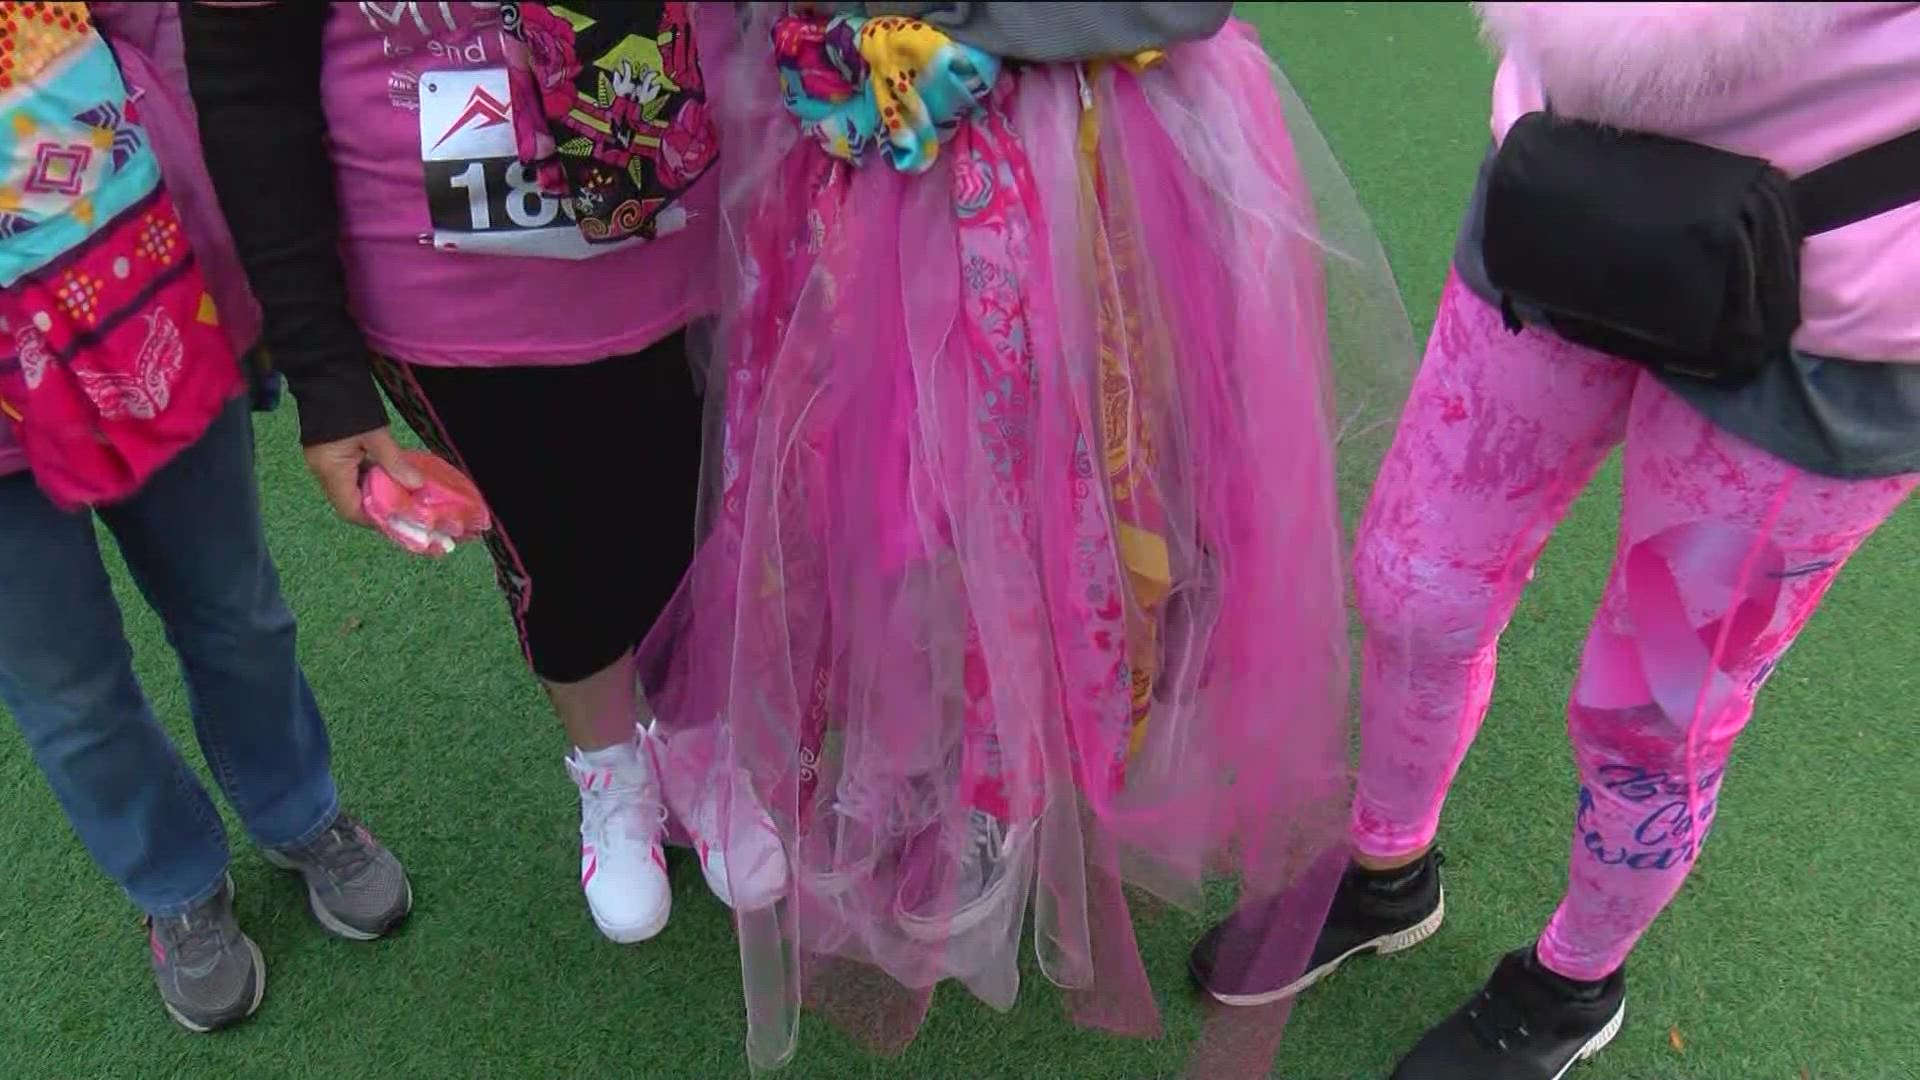 WTOL 11's Diane Phillips finds the best tutu amongst a group of survivors at the 29th Annual Susan G. Komen Race for the Cure.